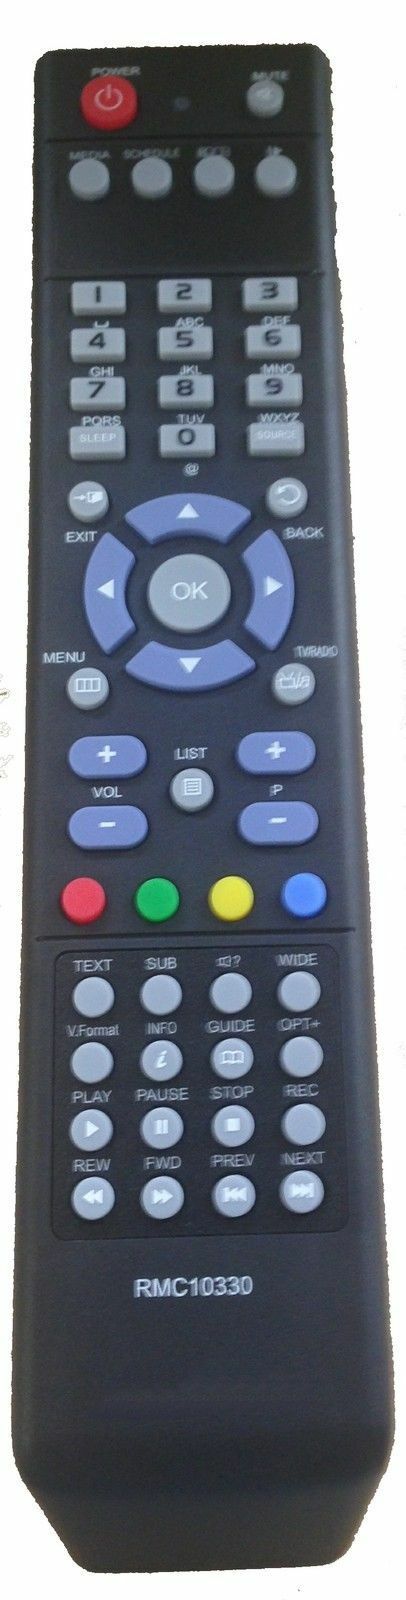 Replacement Remote Control for FOREVER HD9898PVR